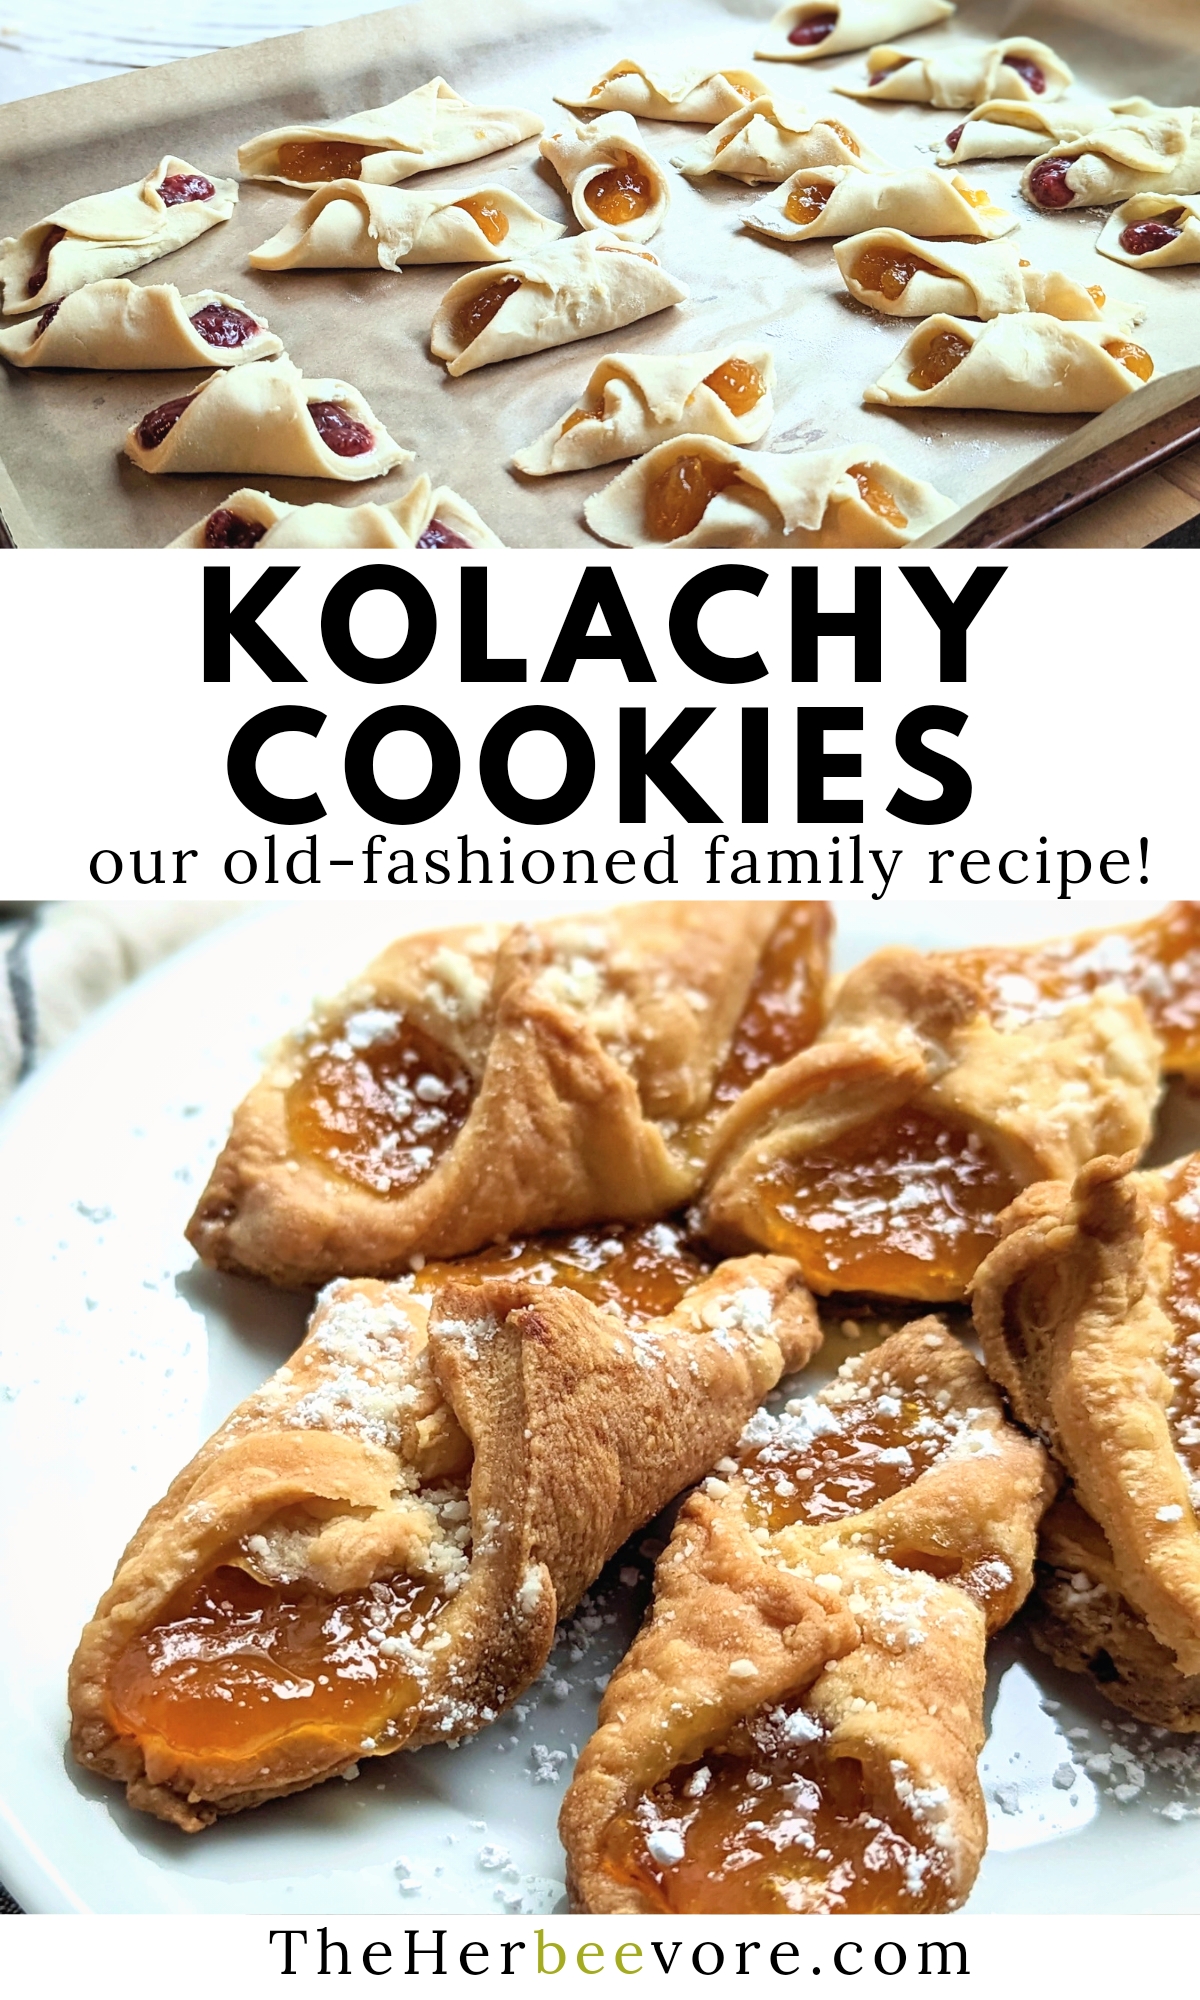 apricot kolachy cookies with a simple 4 ingredient cookie dough and apricot jam and preserves